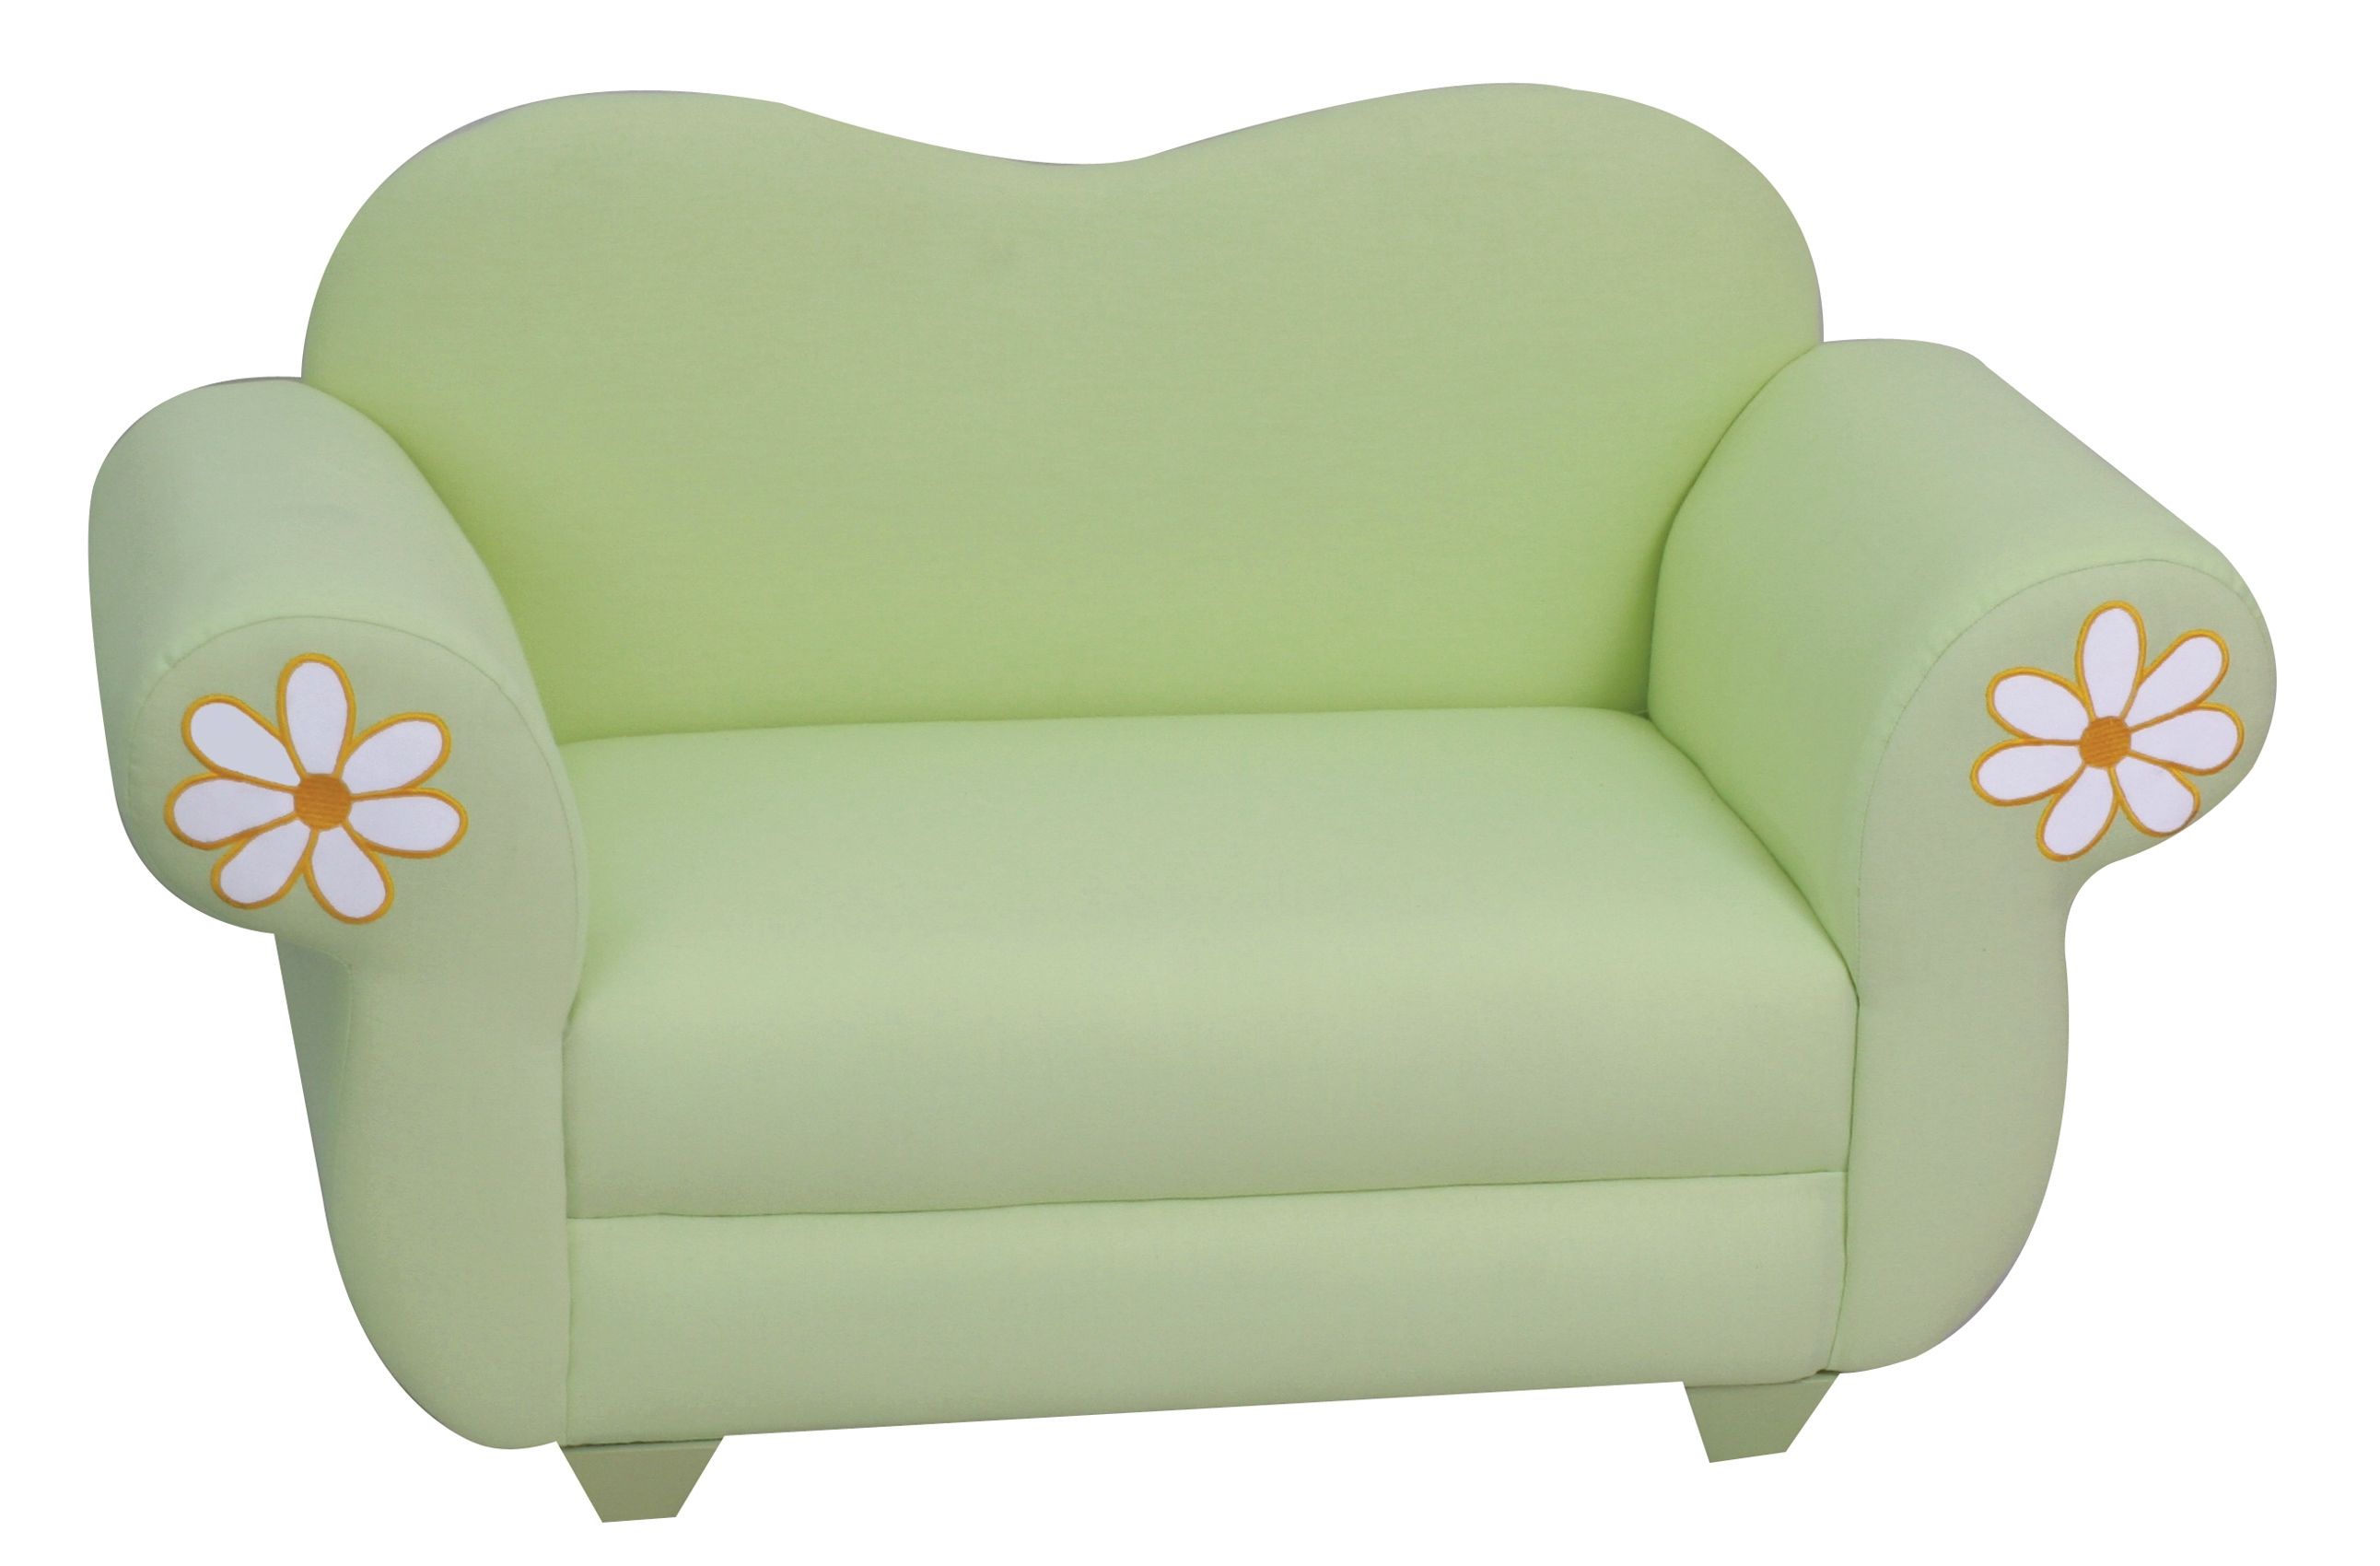 59 Sofas And Chairs Furniture Diy Furniture Sofas Armchairs Regarding Sofa With Chairs (View 5 of 15)